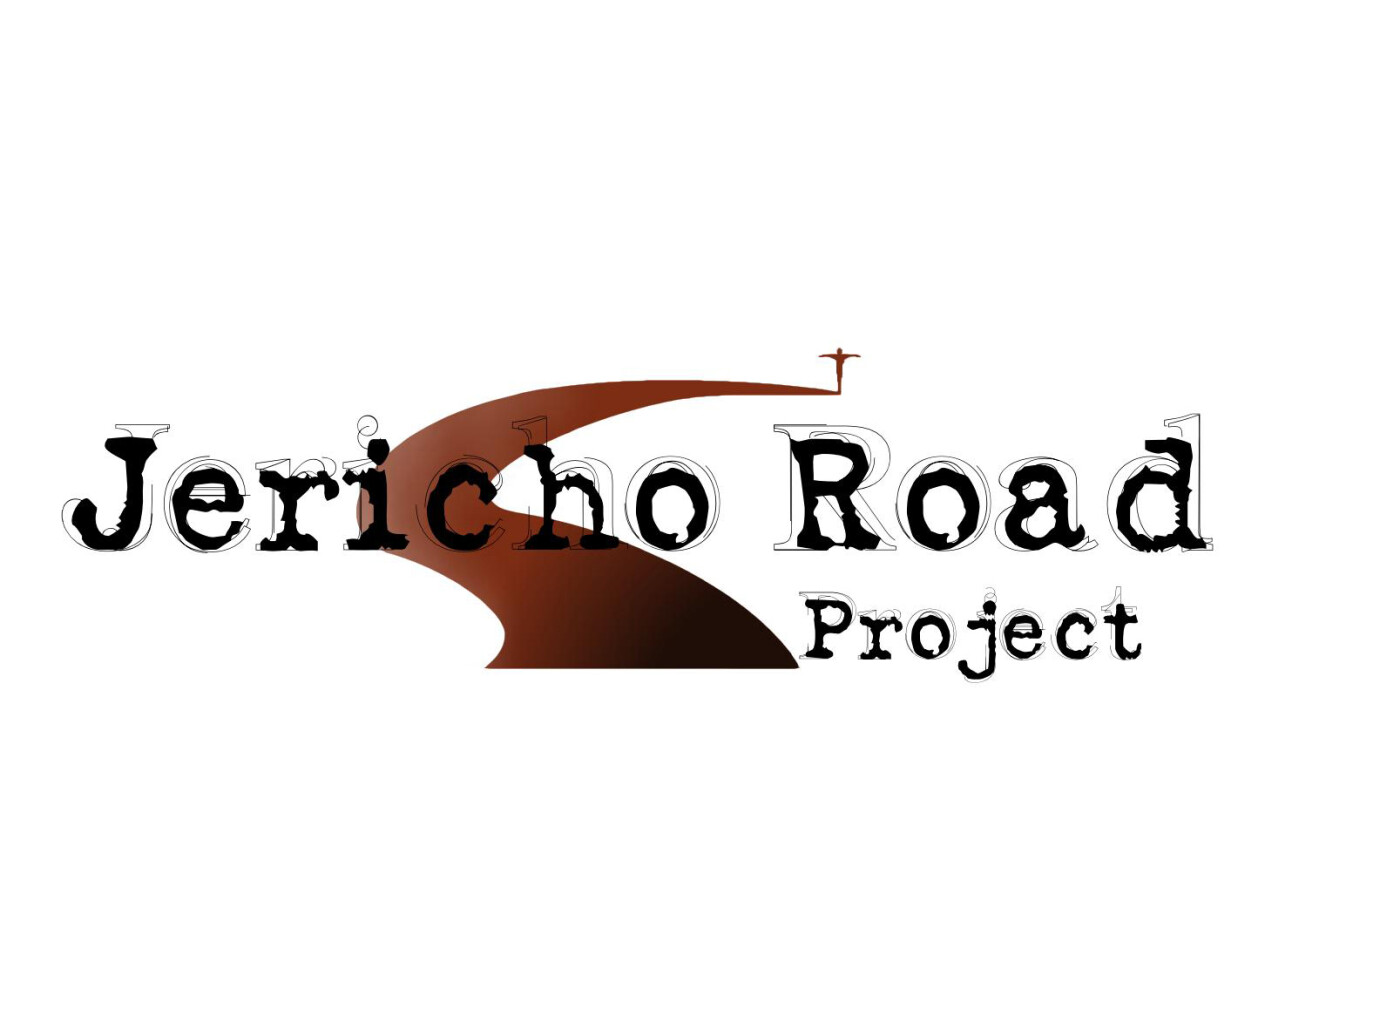 Jericho Road Project 2021